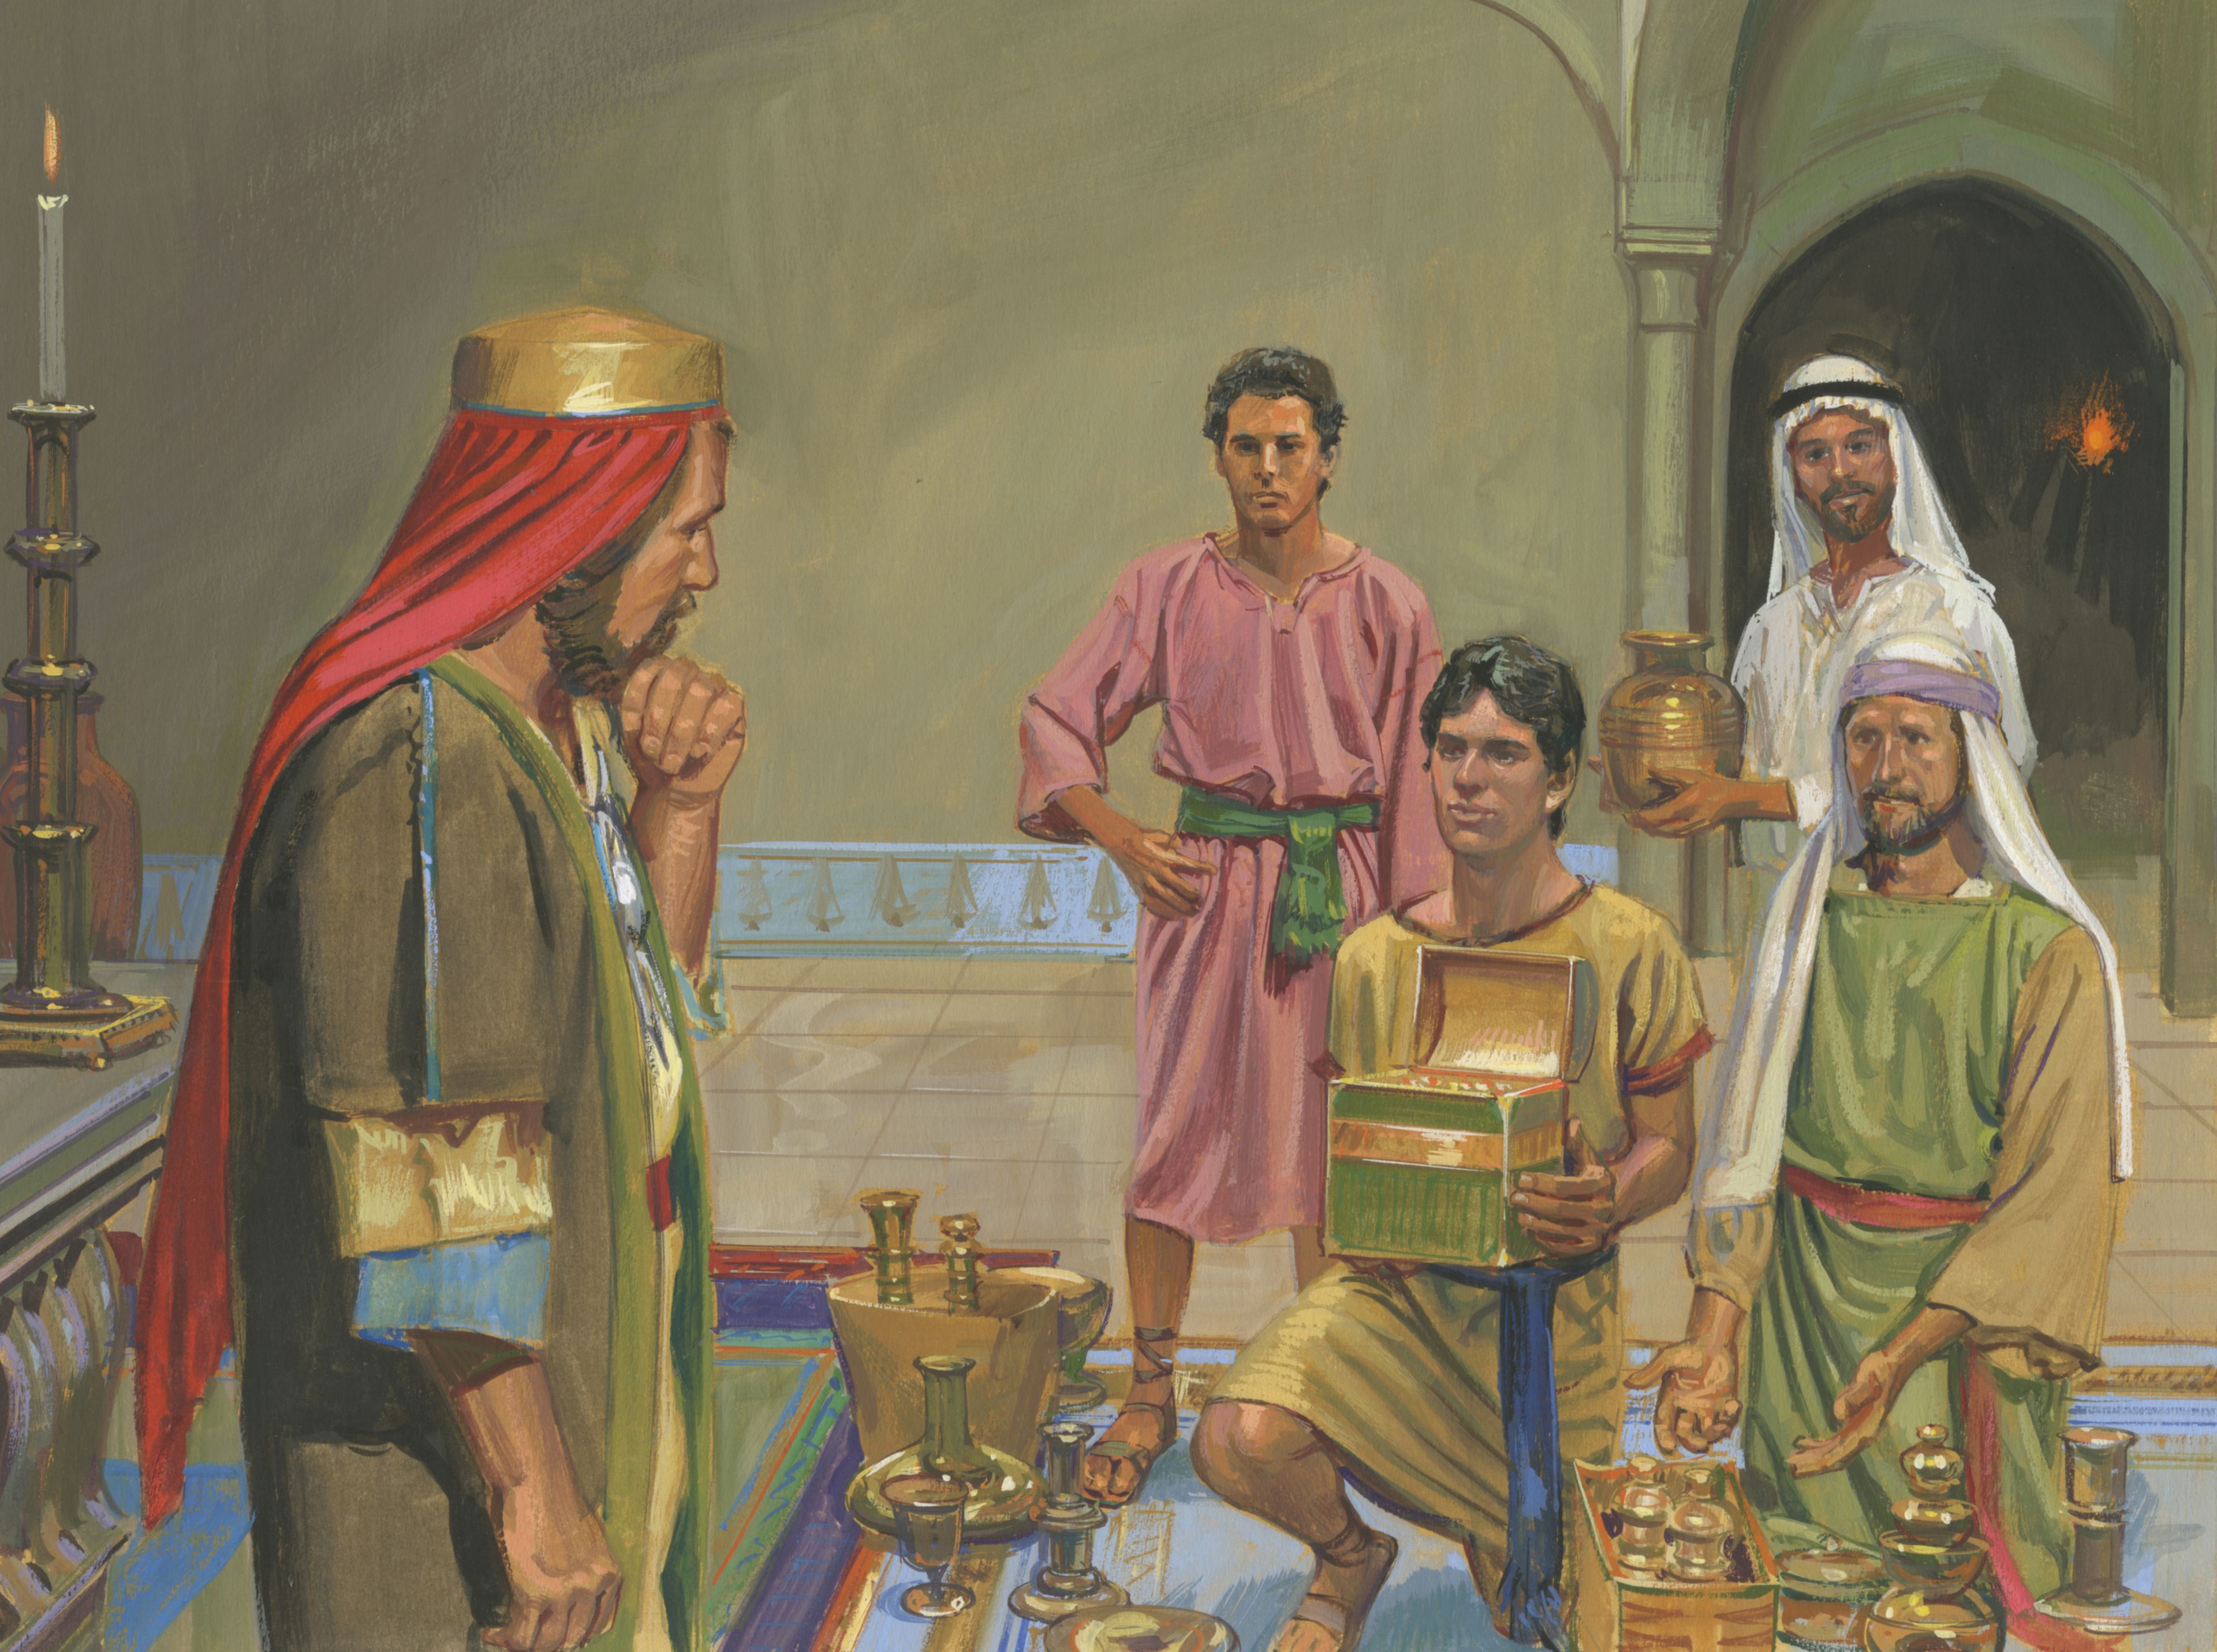 A painting by Jerry Thompson depicting Lehi’s sons offering riches to Laban; Primary manual 4-6